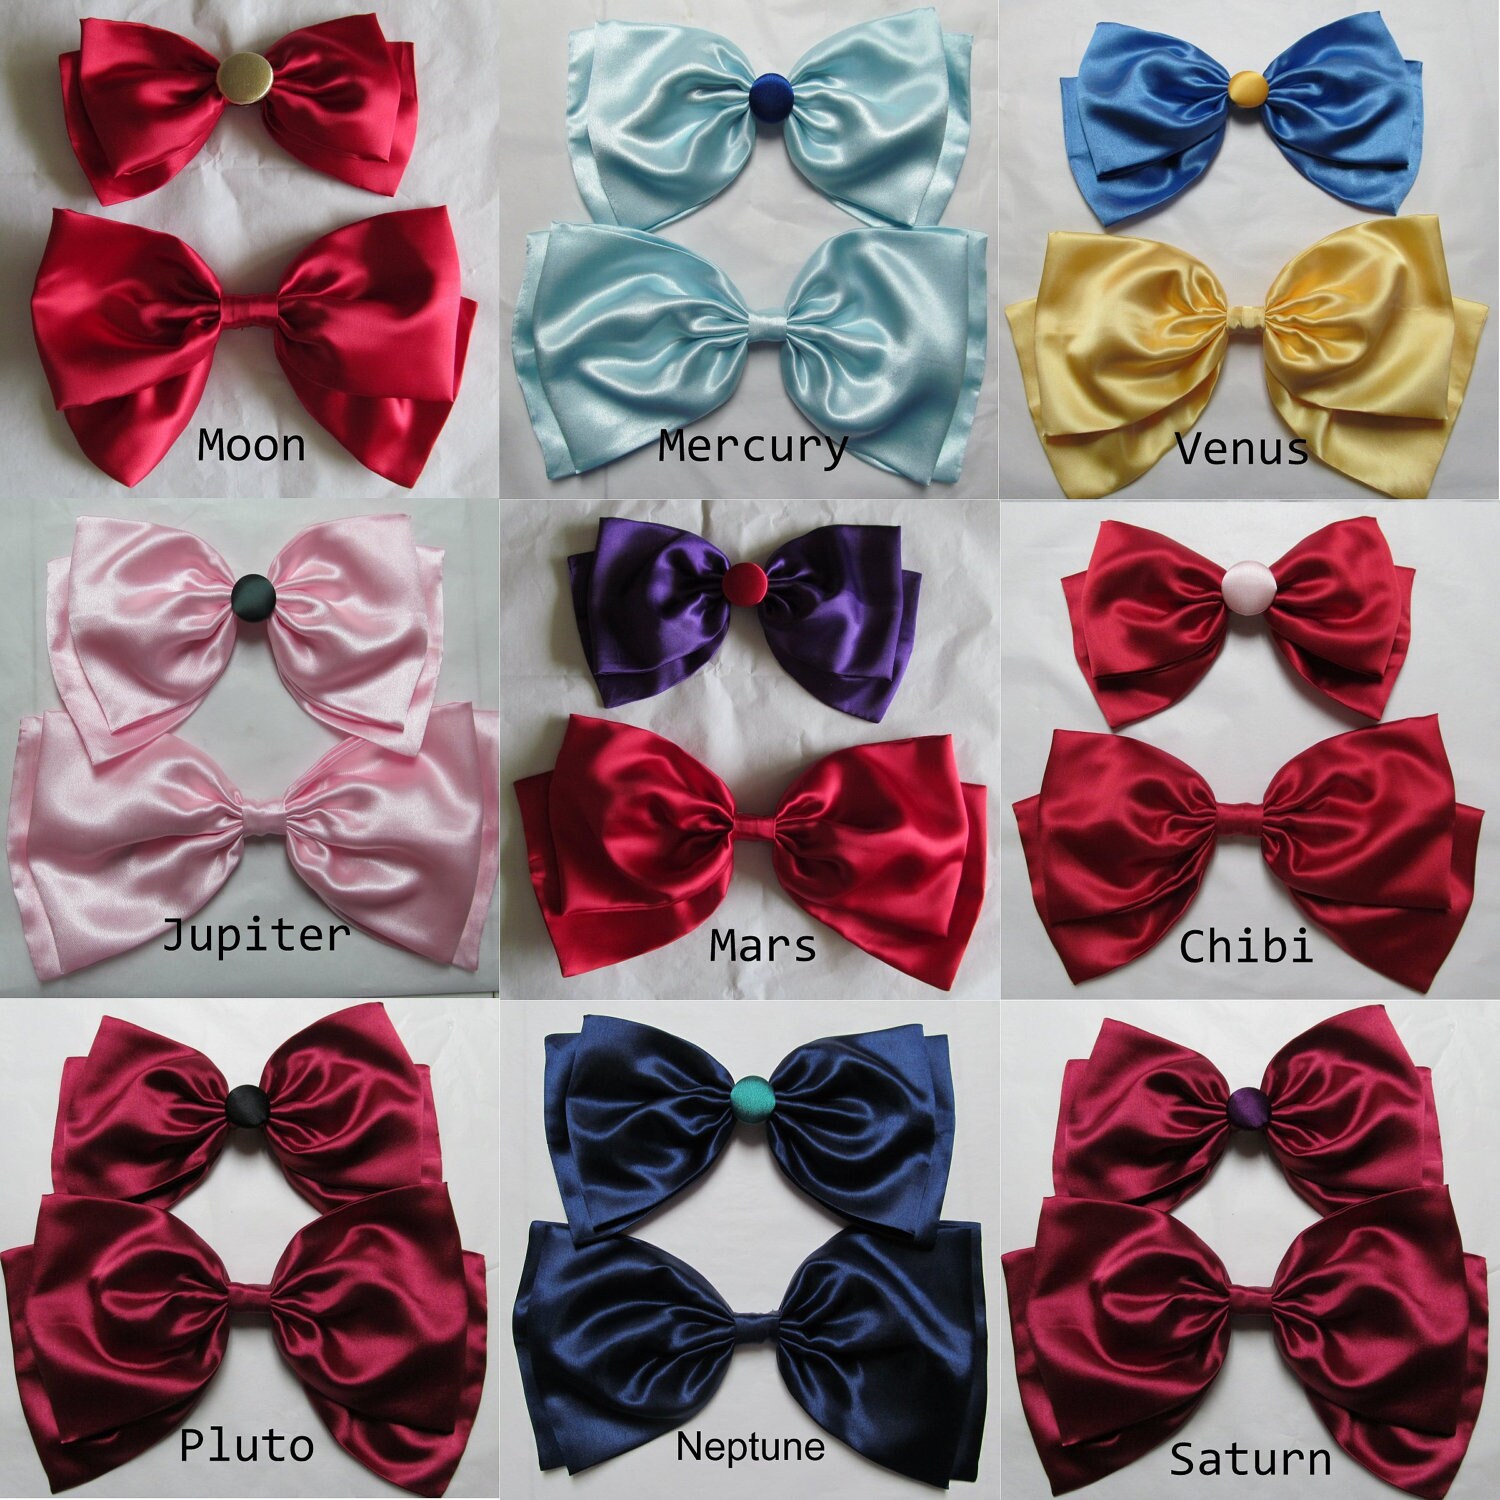 Sailor Moon Sailor Scout Bow Set Costume Cosplay by AGypsyRed